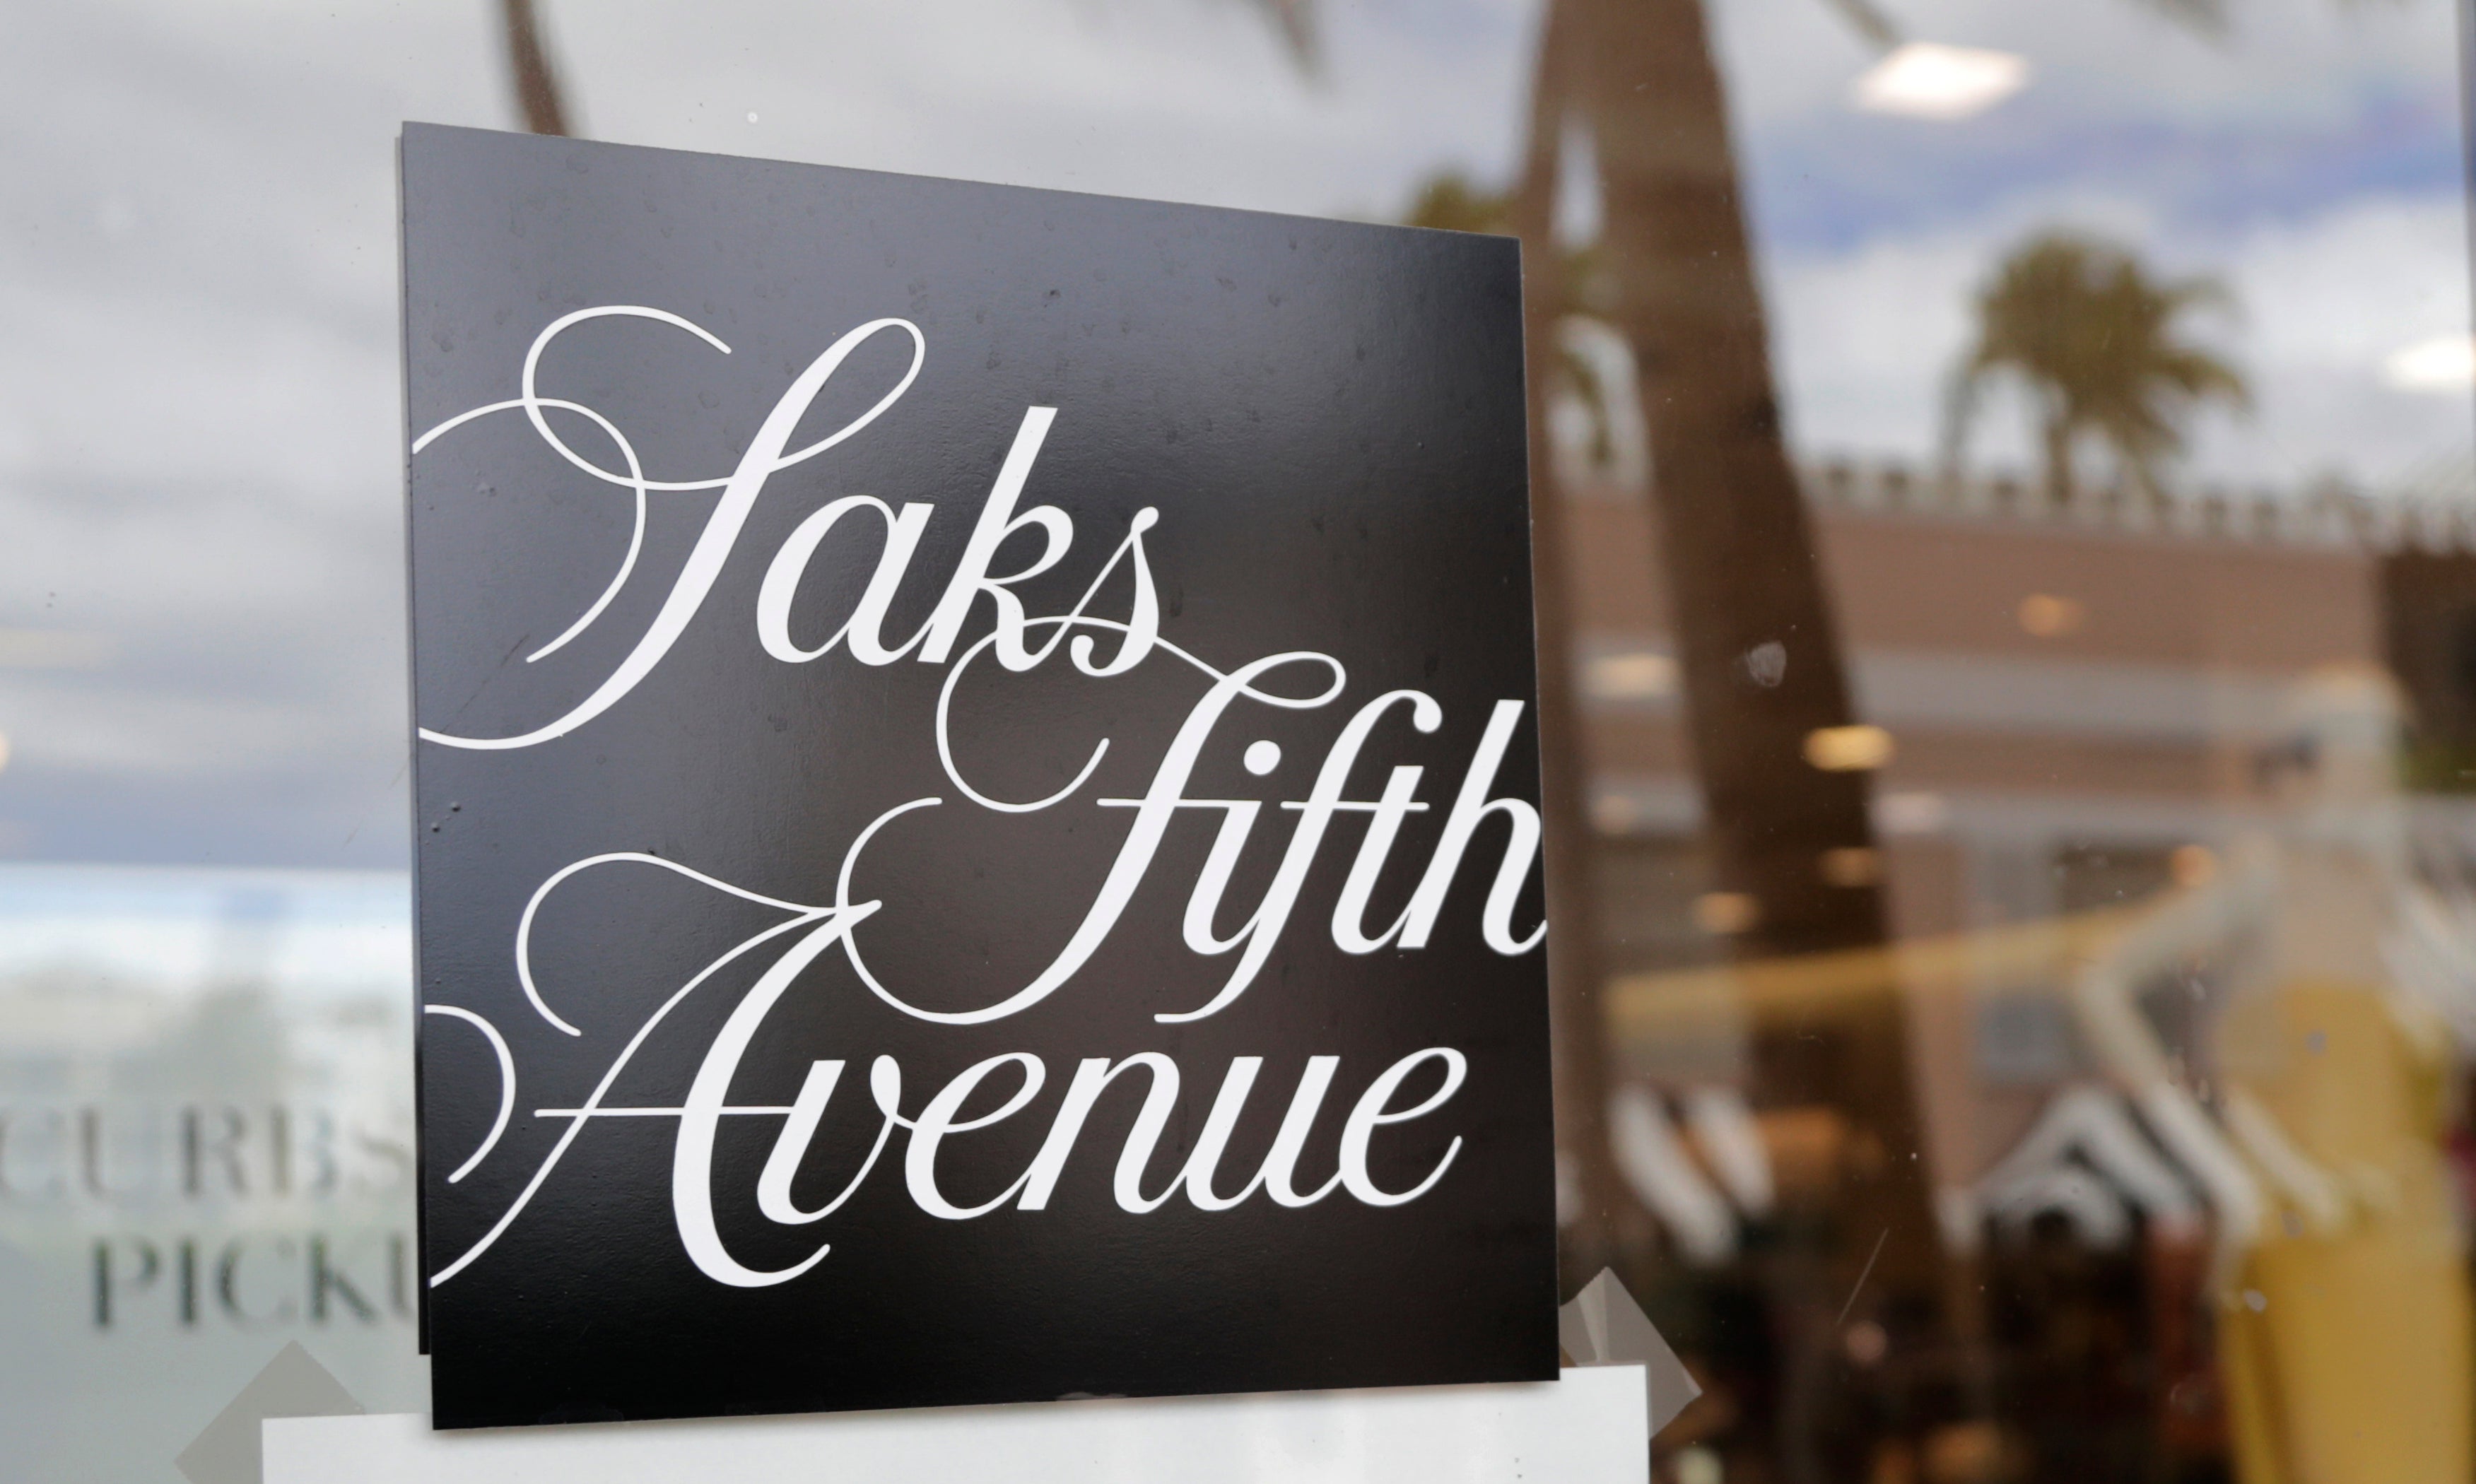 The parent company of department store chain Saks Fifth Avenue has agreed to buy luxury retailer Neiman Marcus